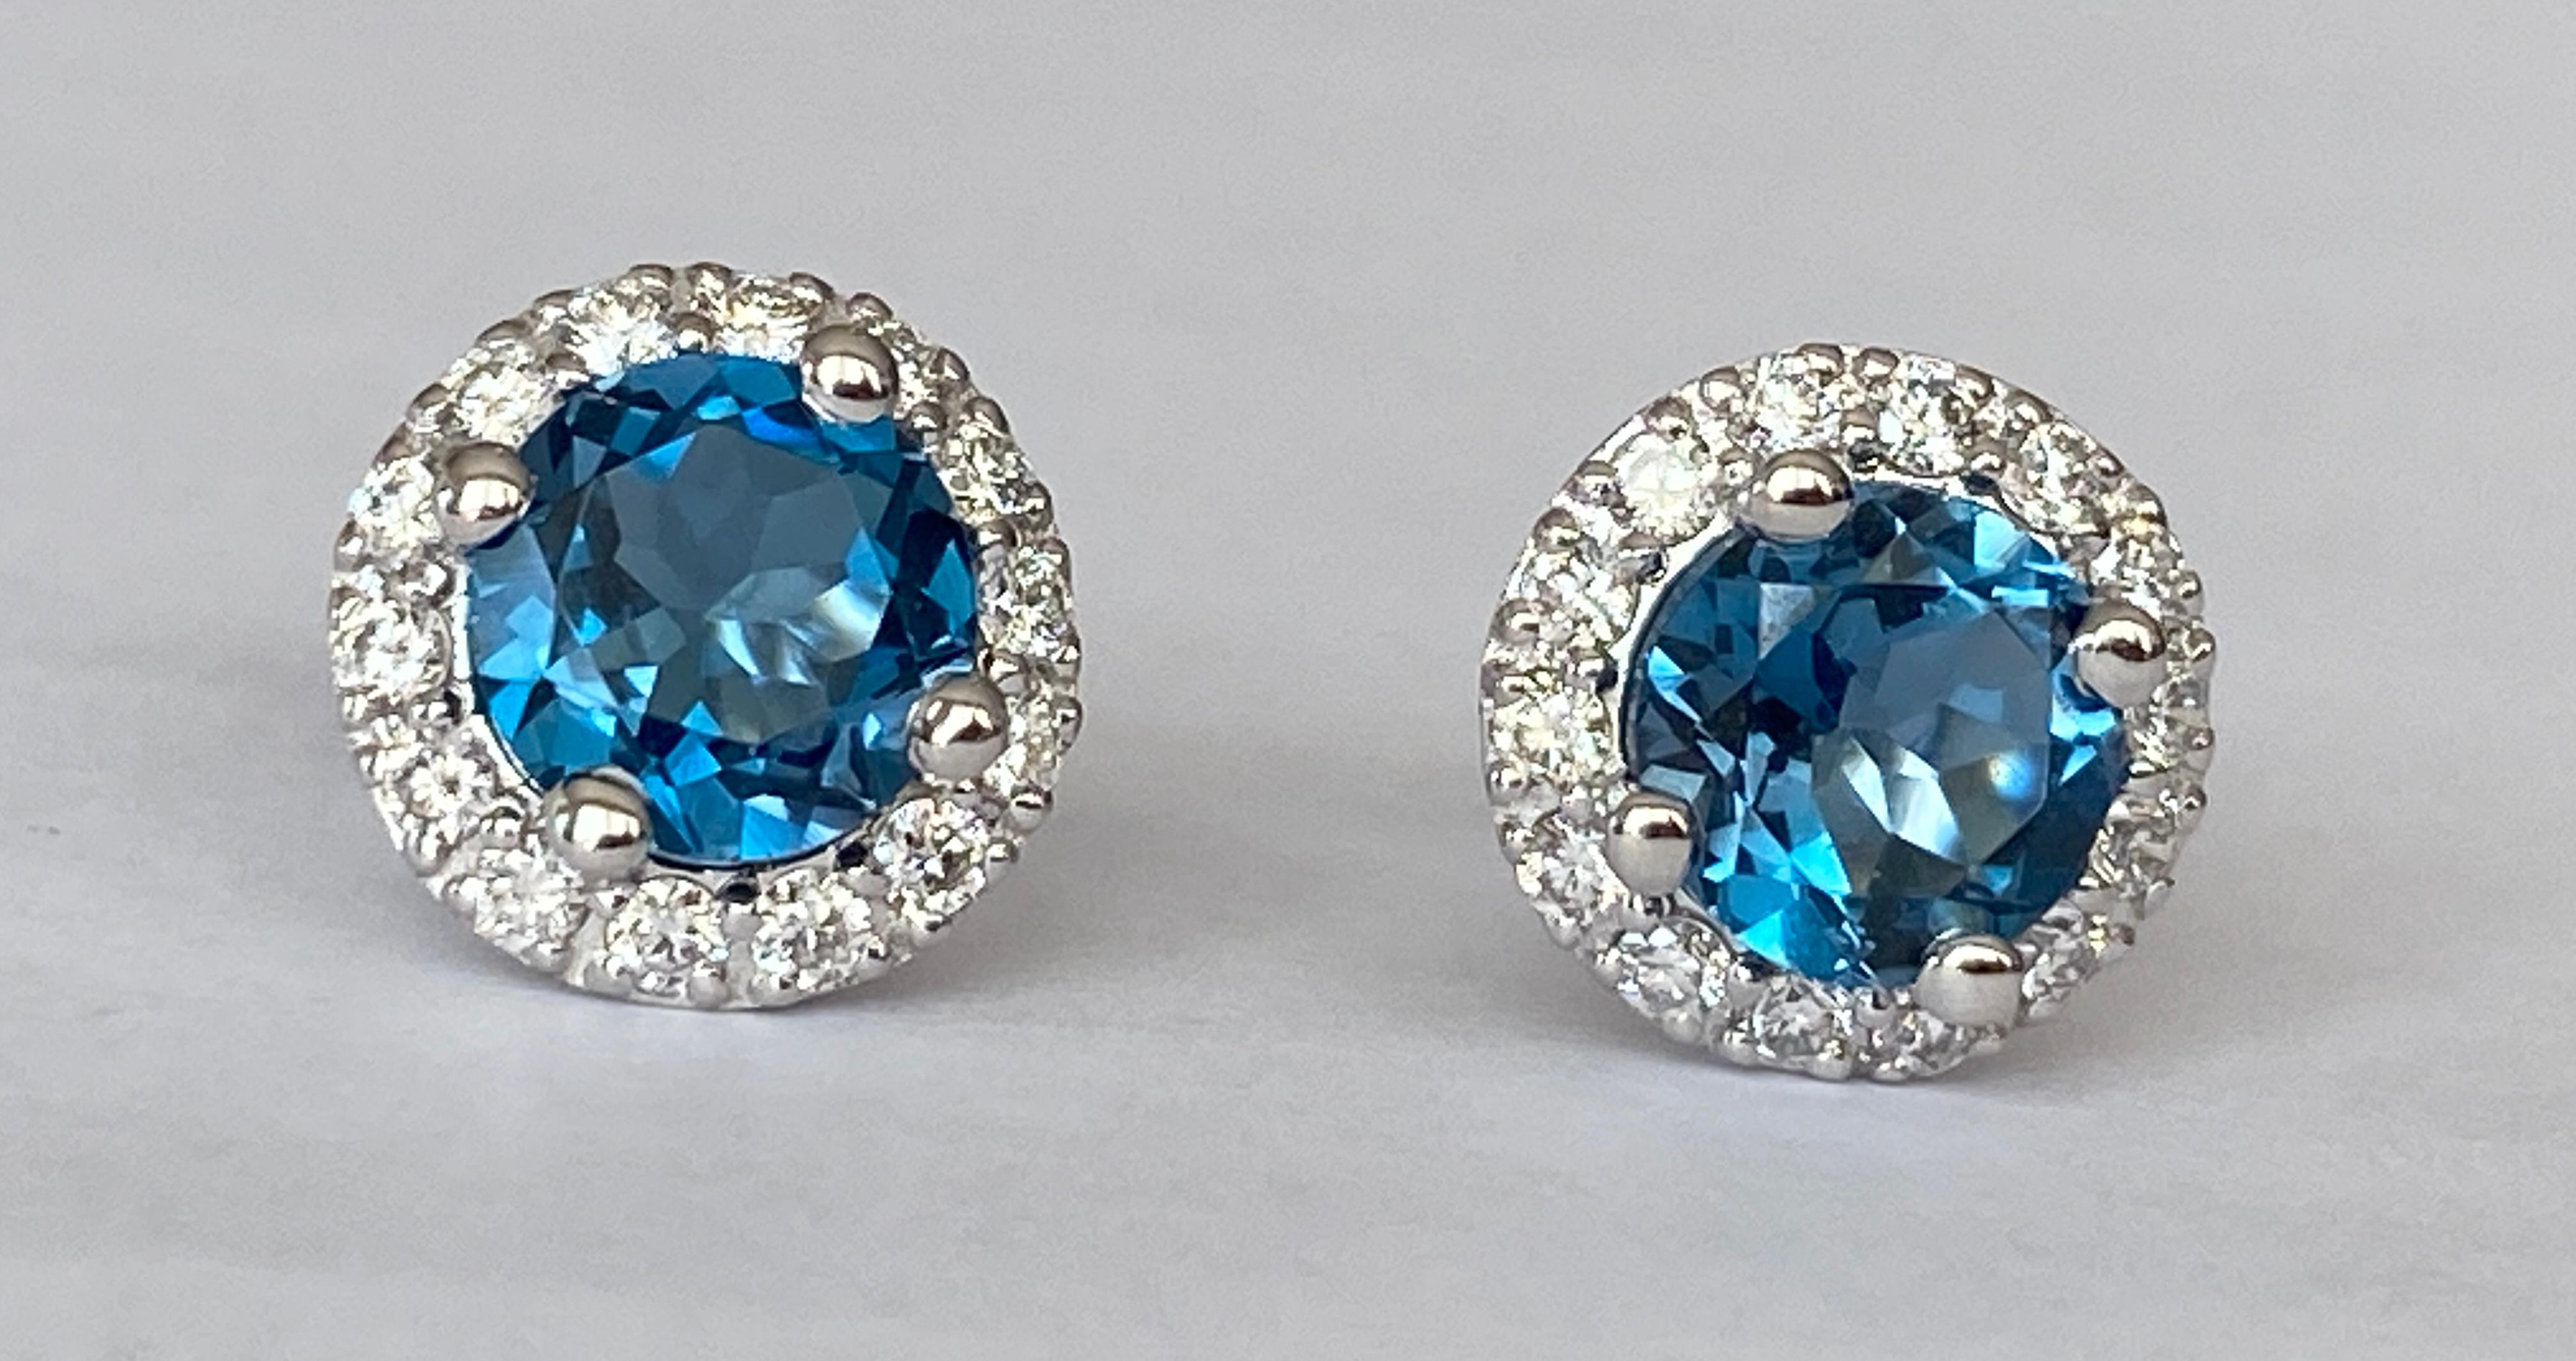 Offered ear studs in white gold, with two pieces of round cut London Blue Topaz approx. 2.00 carat together. The stones are surrounded by an entourage of 30 brilliant cut diamonds, approx. 0.40 ct in total, of quality G/VS/SI.
Gold content: 18 KT